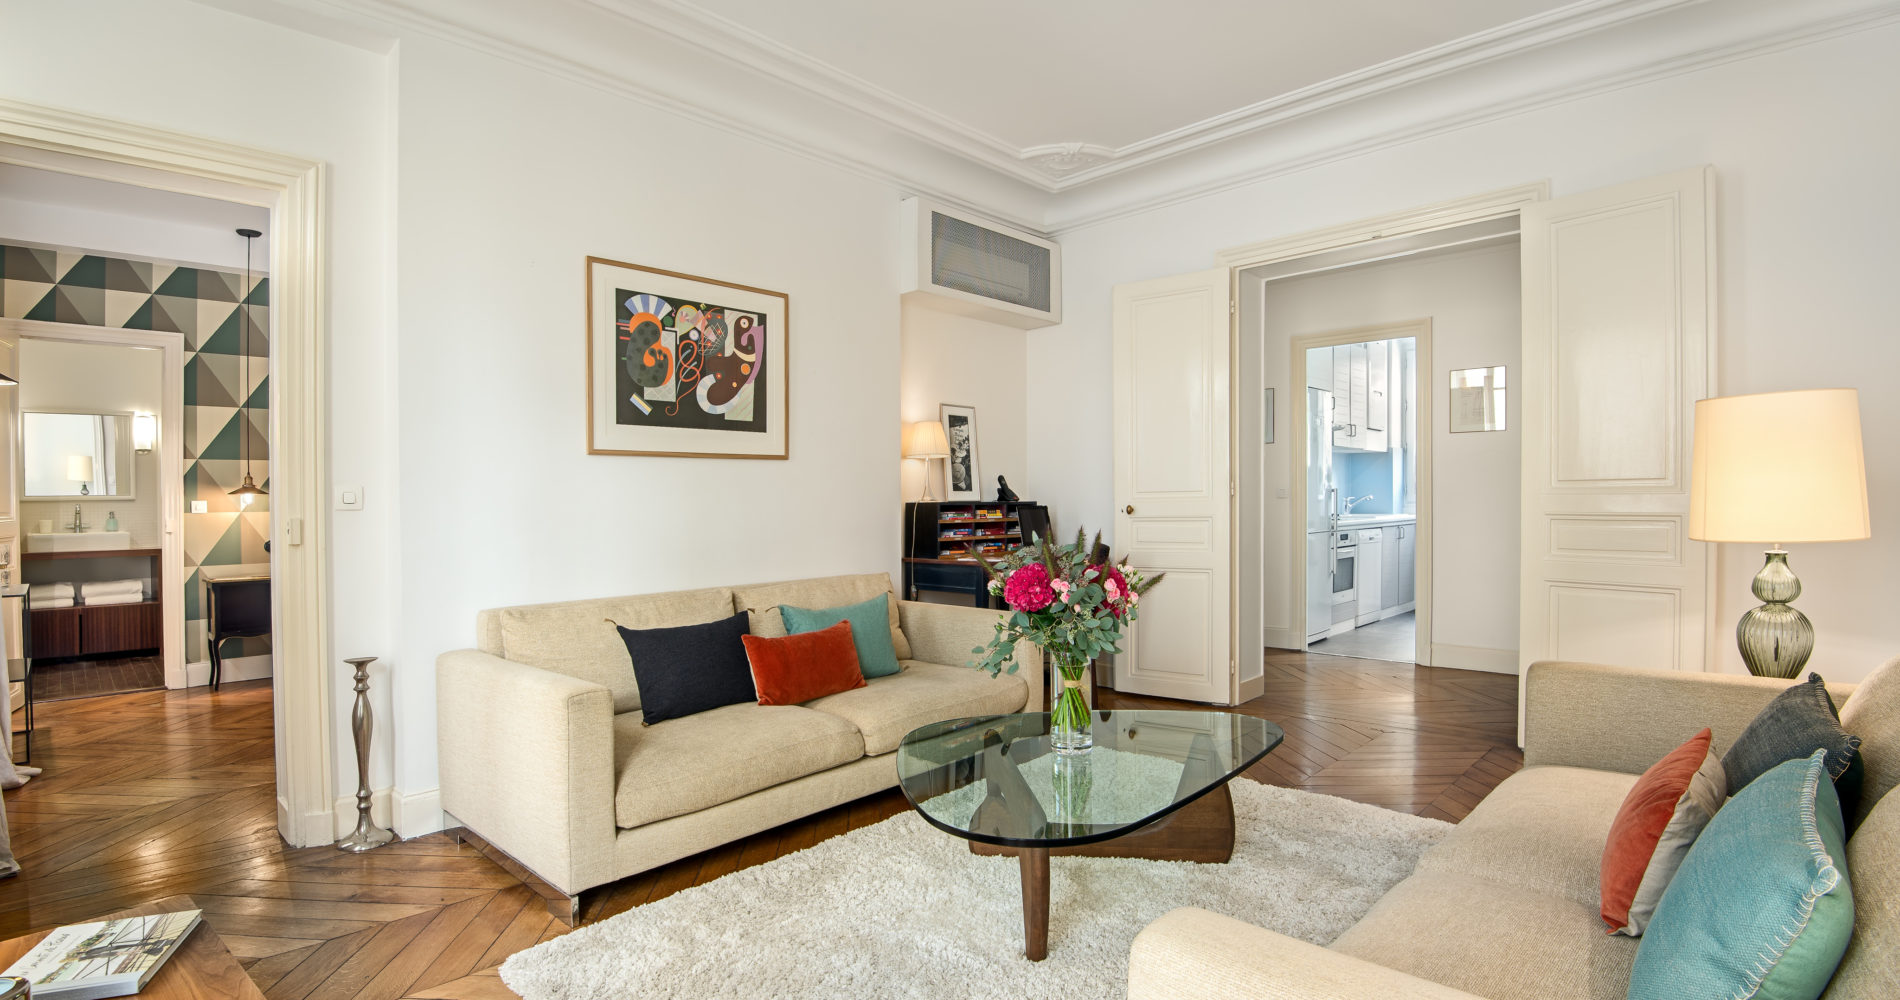 2 bedroom apartment for rent Paris : short stay luxury holiday